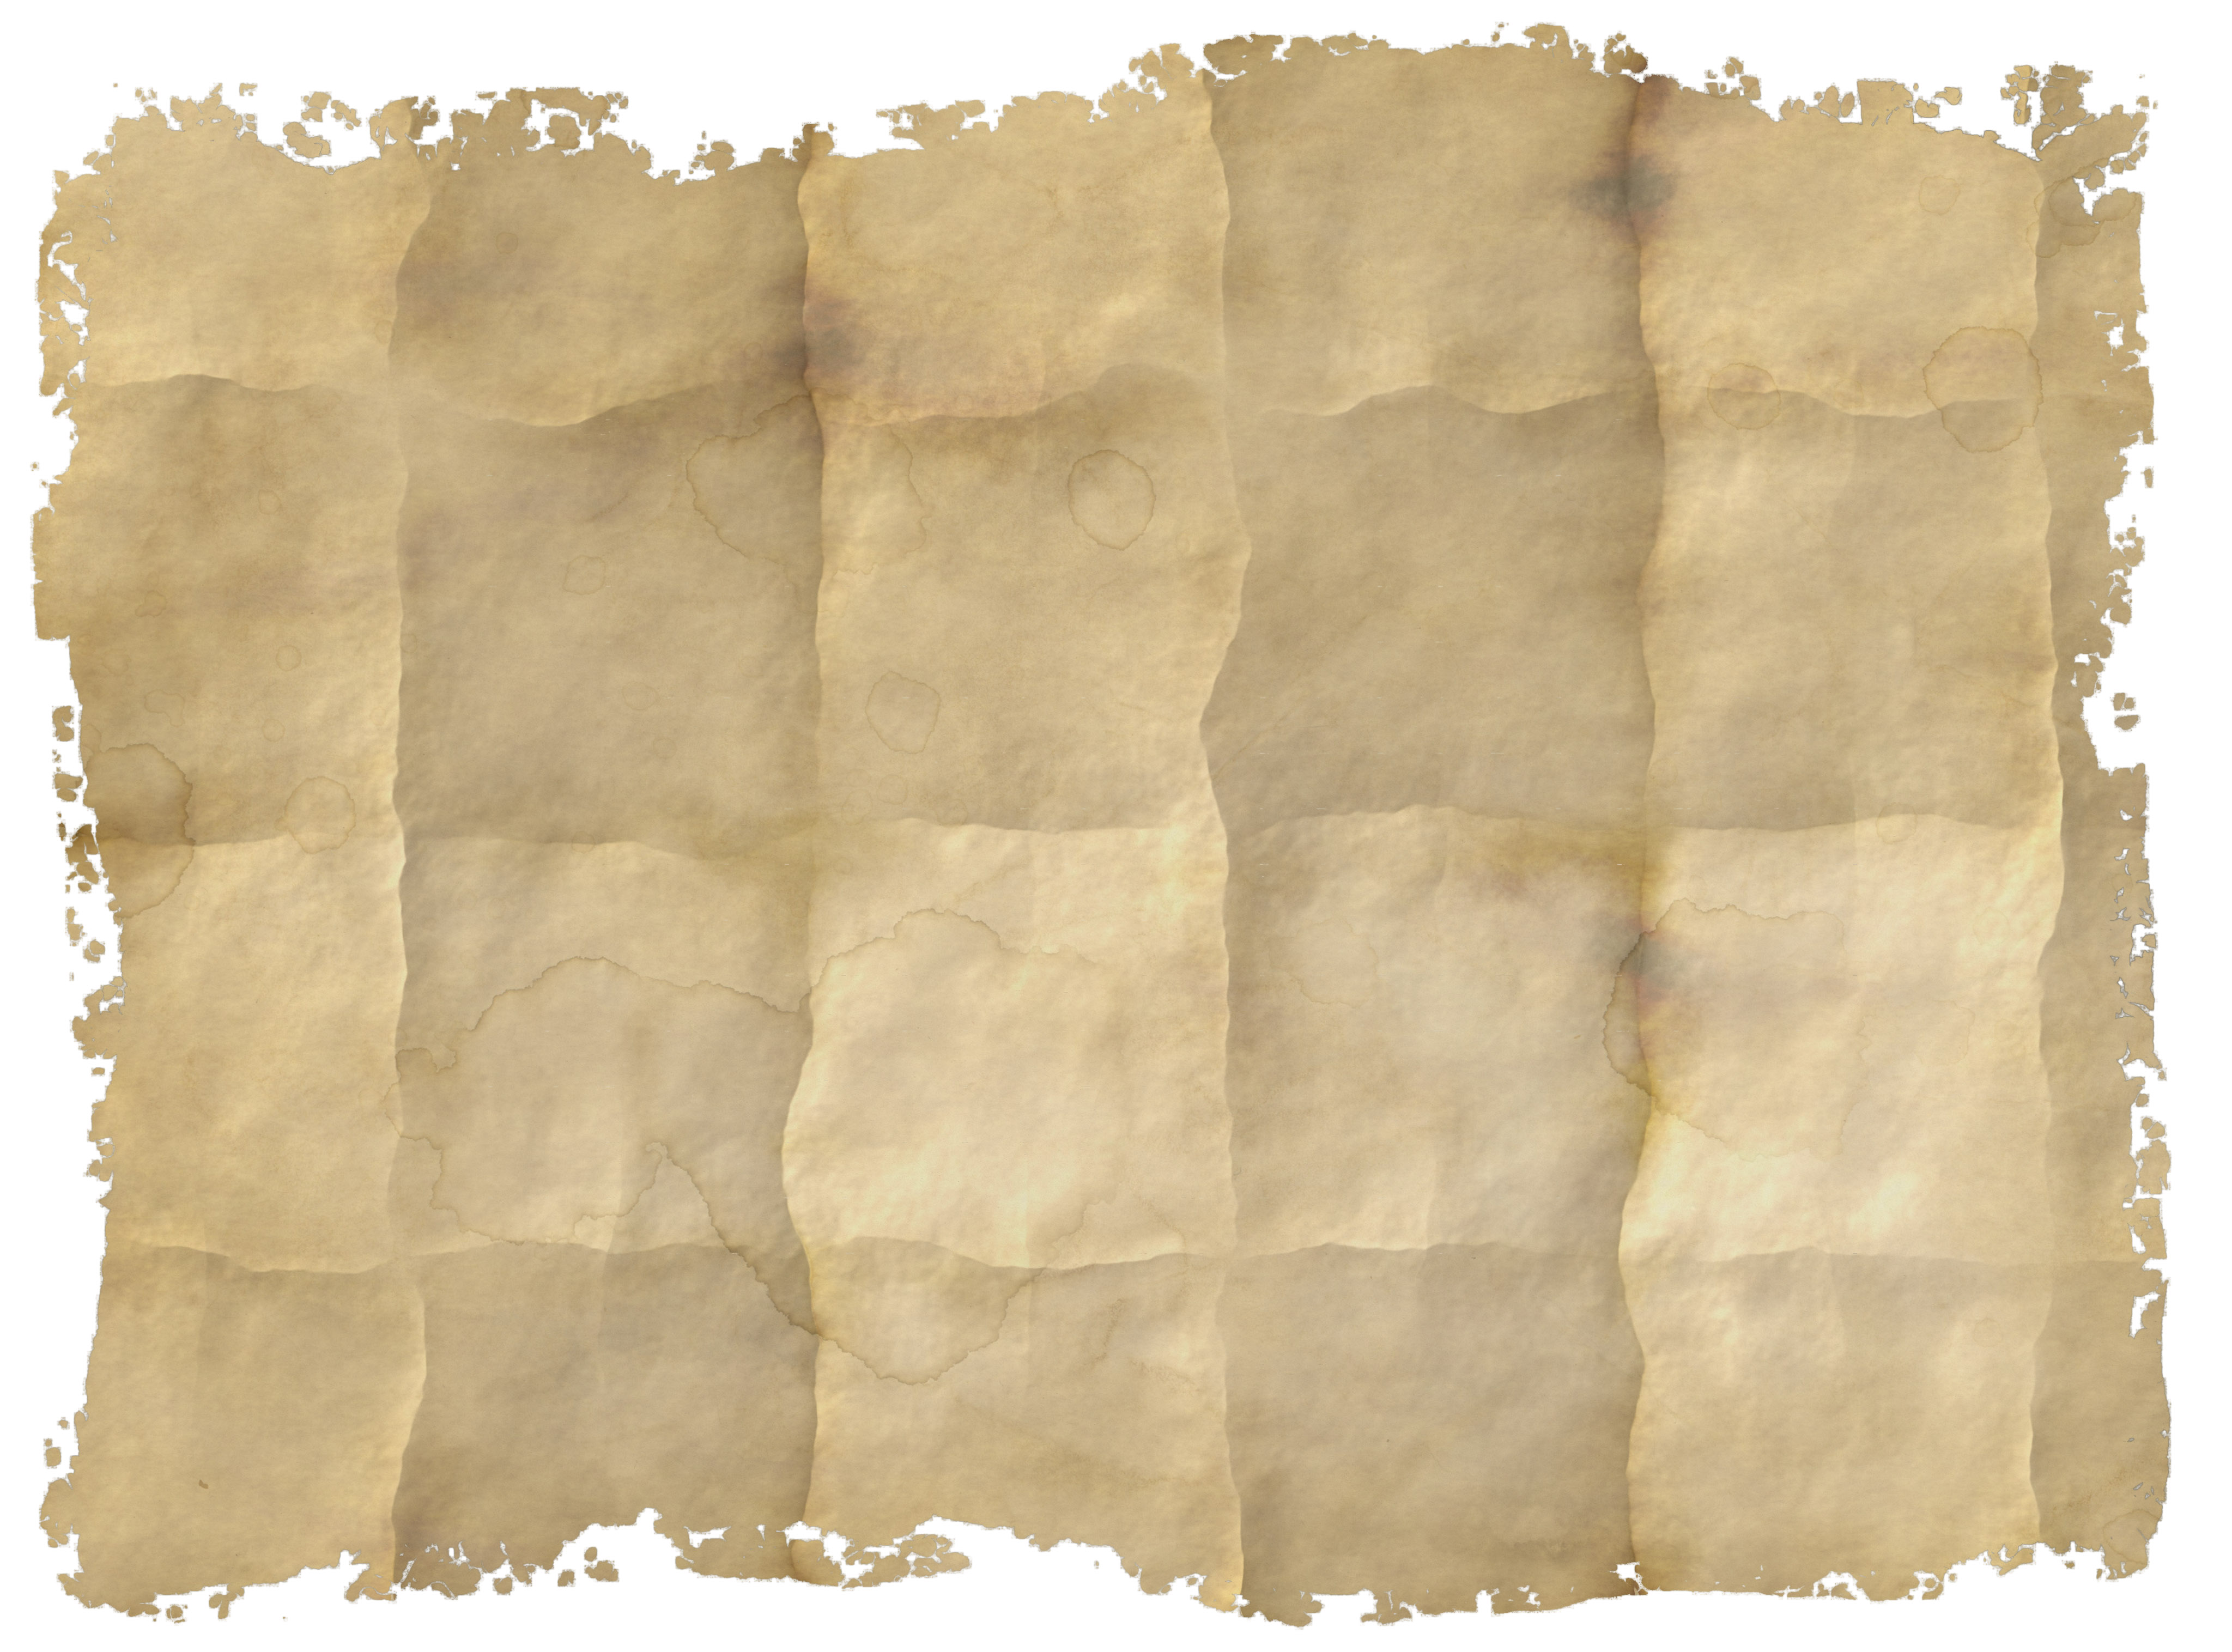 Background Of An Old Folded Paper Texture With Ripped And Torn